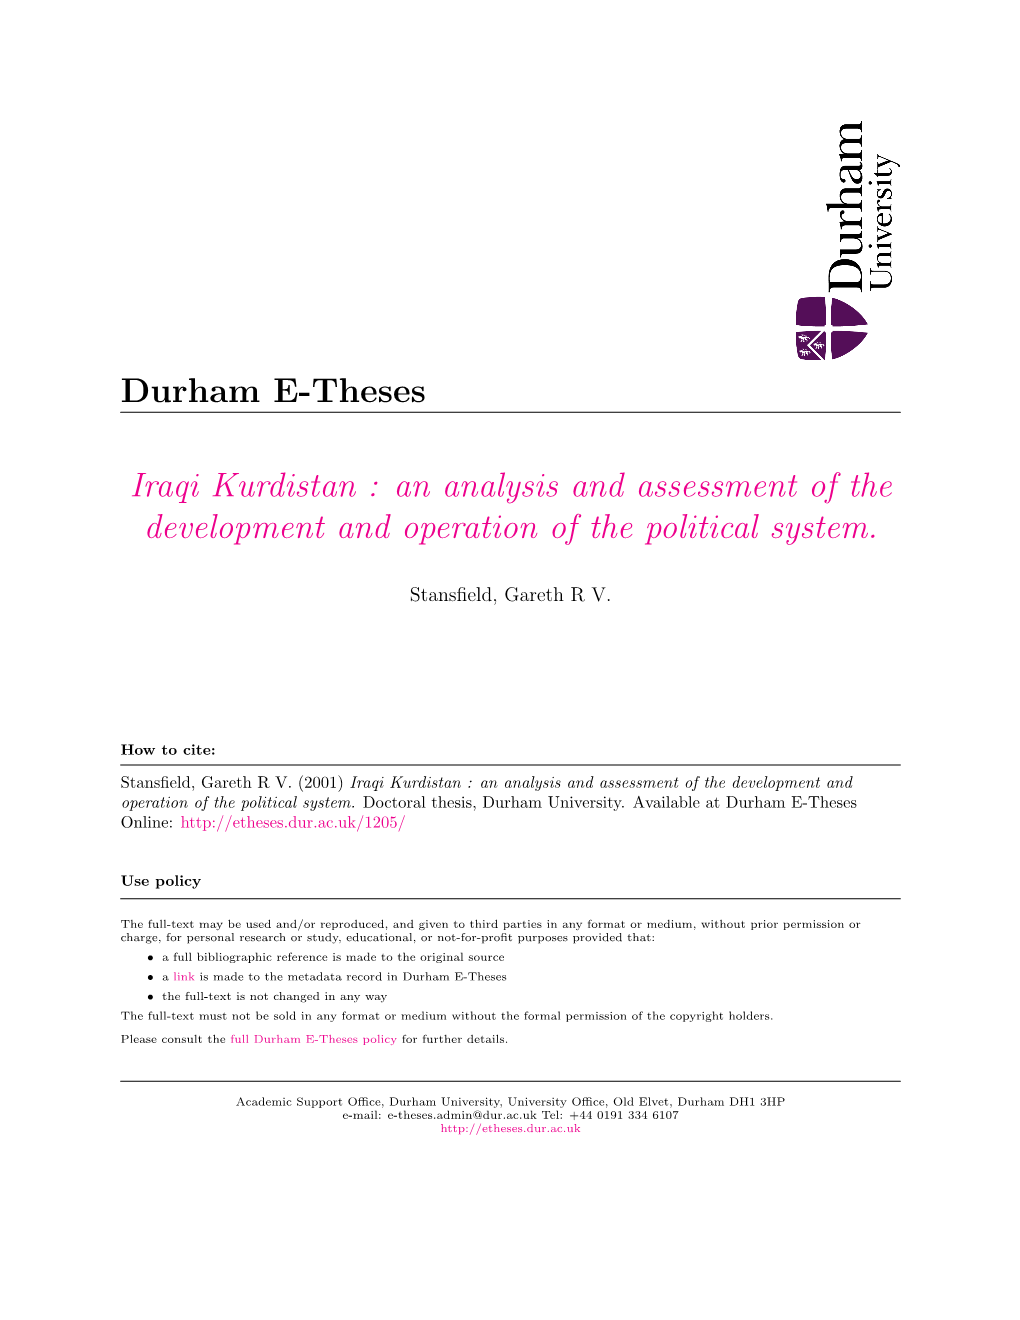 Durham E-Theses Iraqi Kurdistan : an Analysis and Assessment of The